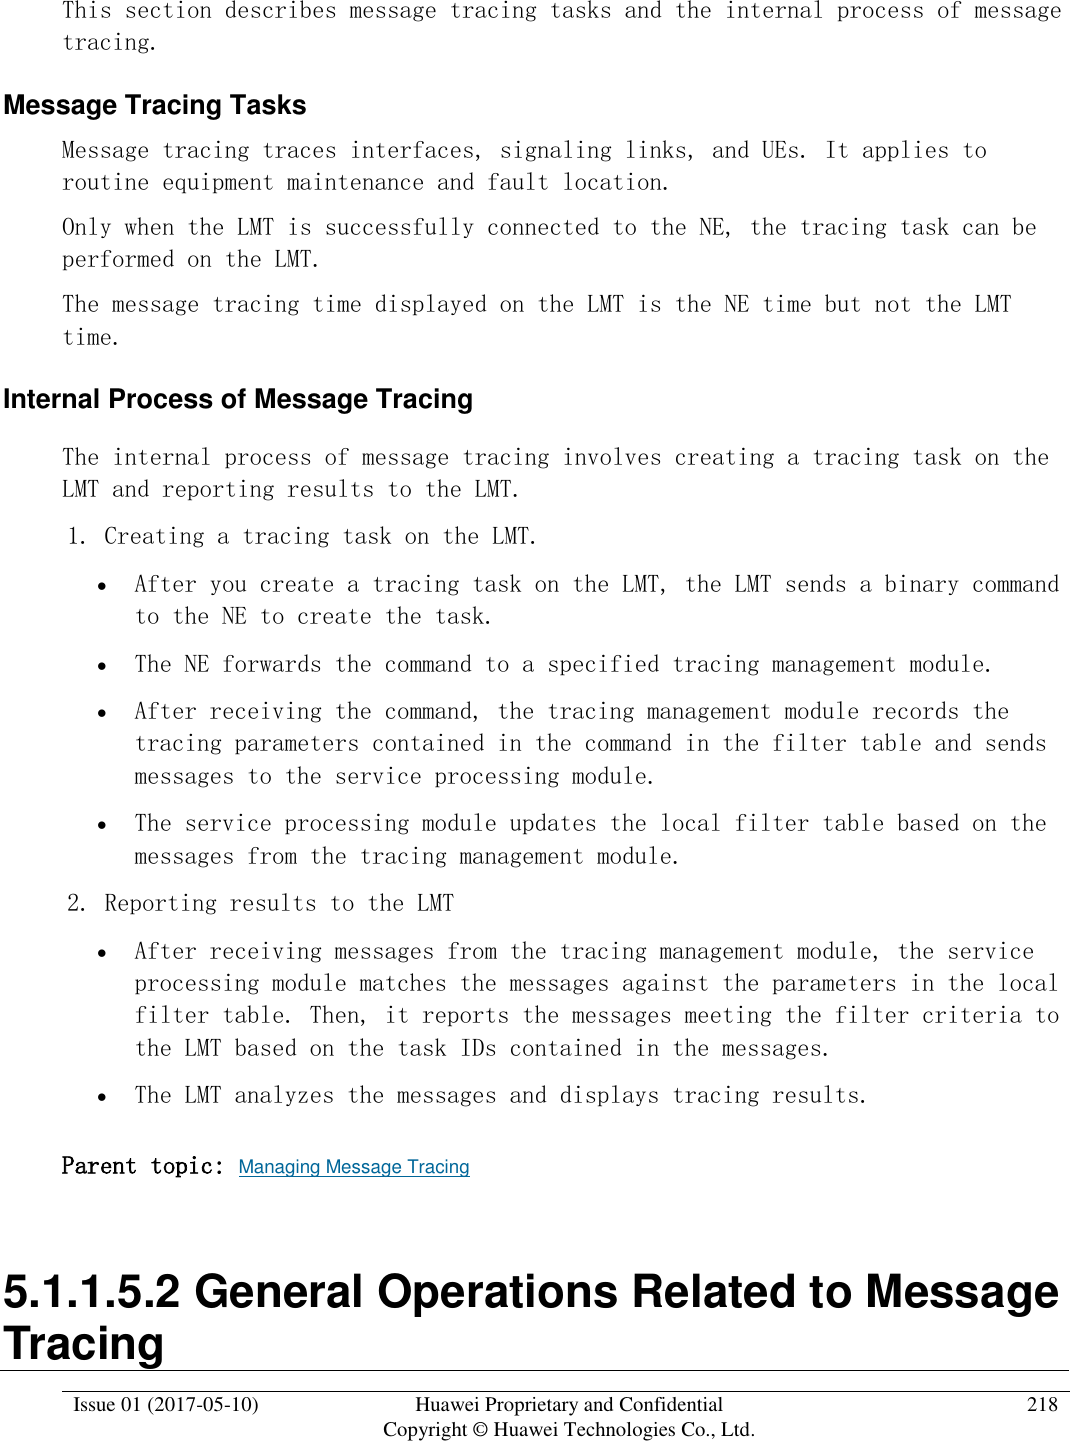  Issue 01 (2017-05-10) Huawei Proprietary and Confidential      Copyright © Huawei Technologies Co., Ltd. 218  This section describes message tracing tasks and the internal process of message tracing. Message Tracing Tasks Message tracing traces interfaces, signaling links, and UEs. It applies to routine equipment maintenance and fault location. Only when the LMT is successfully connected to the NE, the tracing task can be performed on the LMT. The message tracing time displayed on the LMT is the NE time but not the LMT time. Internal Process of Message Tracing The internal process of message tracing involves creating a tracing task on the LMT and reporting results to the LMT.  1. Creating a tracing task on the LMT.  After you create a tracing task on the LMT, the LMT sends a binary command to the NE to create the task.  The NE forwards the command to a specified tracing management module.  After receiving the command, the tracing management module records the tracing parameters contained in the command in the filter table and sends messages to the service processing module.  The service processing module updates the local filter table based on the messages from the tracing management module. 2. Reporting results to the LMT  After receiving messages from the tracing management module, the service processing module matches the messages against the parameters in the local filter table. Then, it reports the messages meeting the filter criteria to the LMT based on the task IDs contained in the messages.  The LMT analyzes the messages and displays tracing results.  Parent topic: Managing Message Tracing 5.1.1.5.2 General Operations Related to Message Tracing 